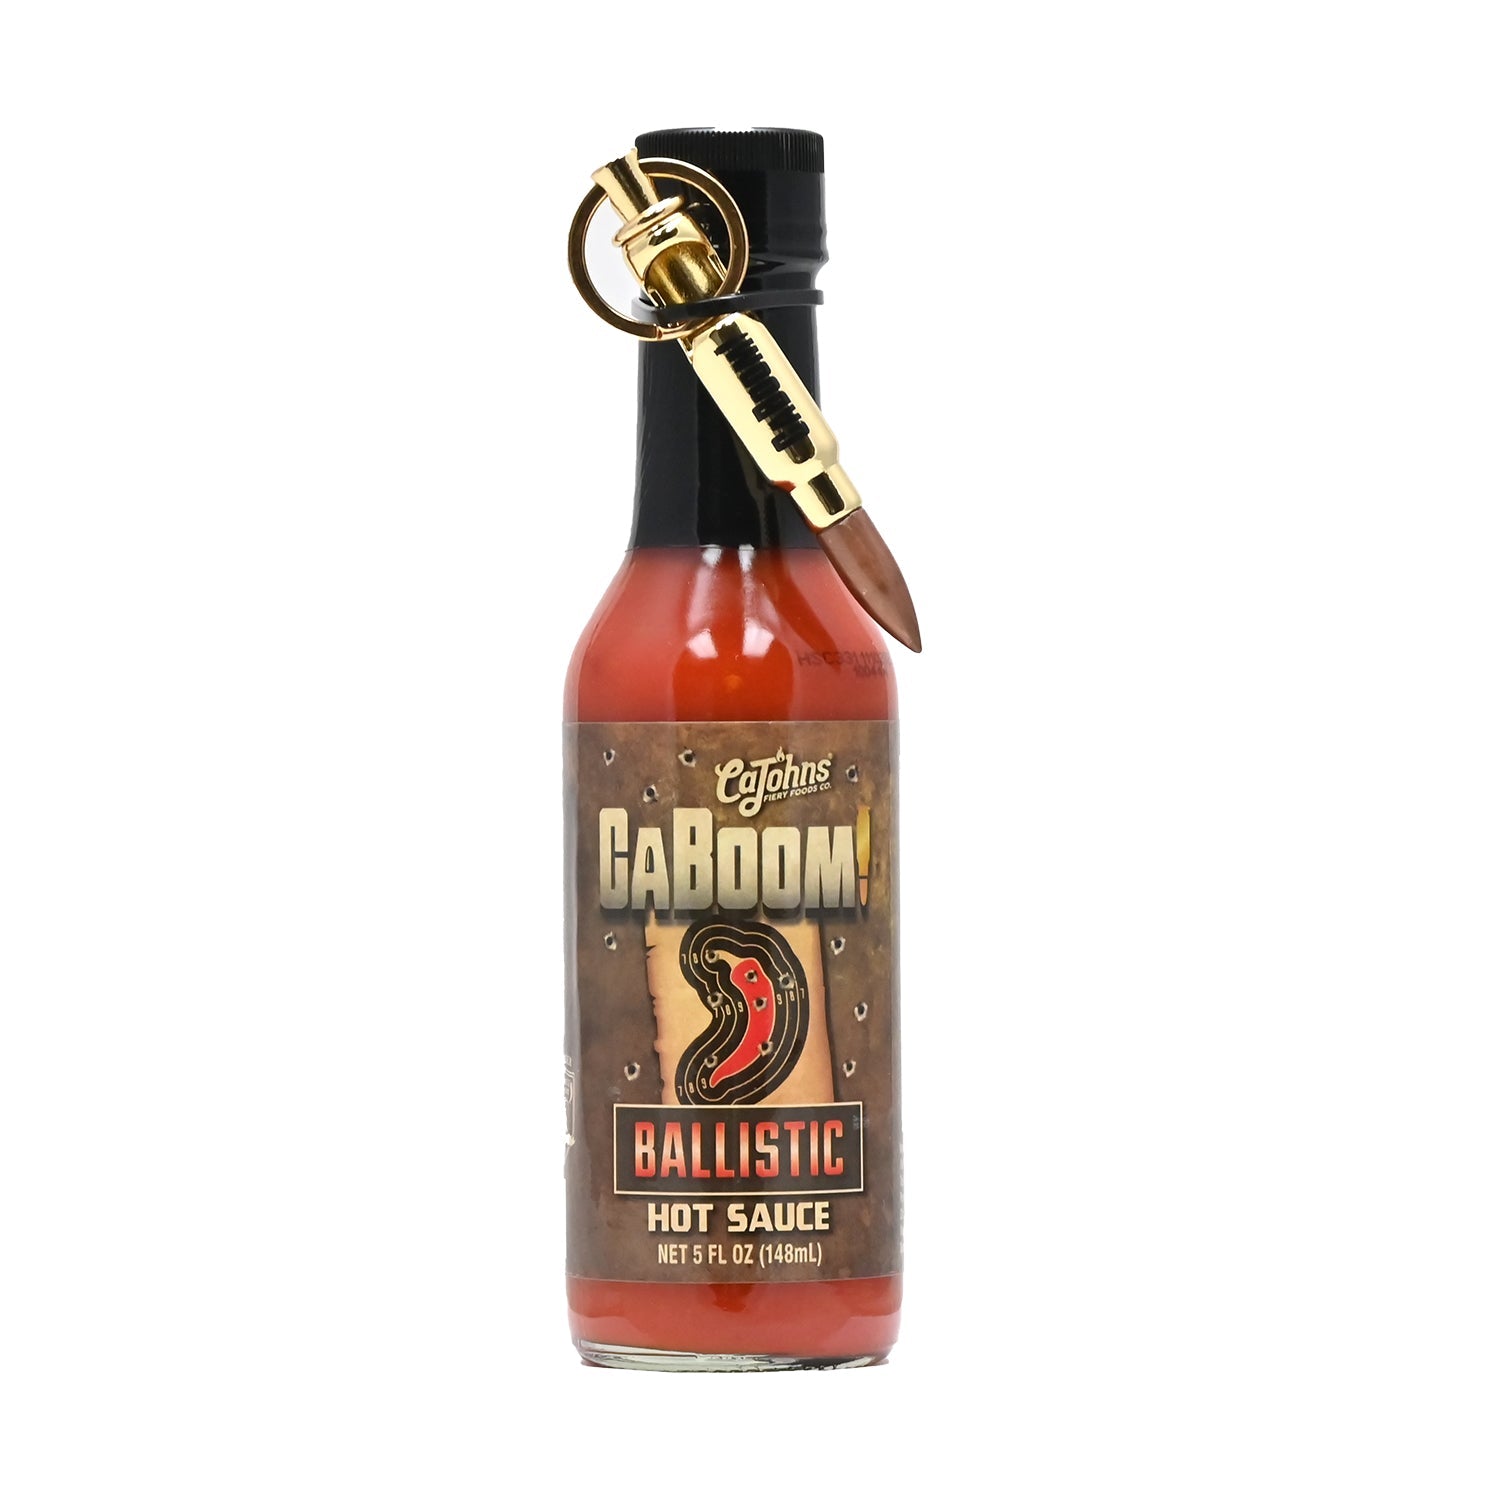 CaBoom! Ballistic Hot Sauce with Bullet Keychain